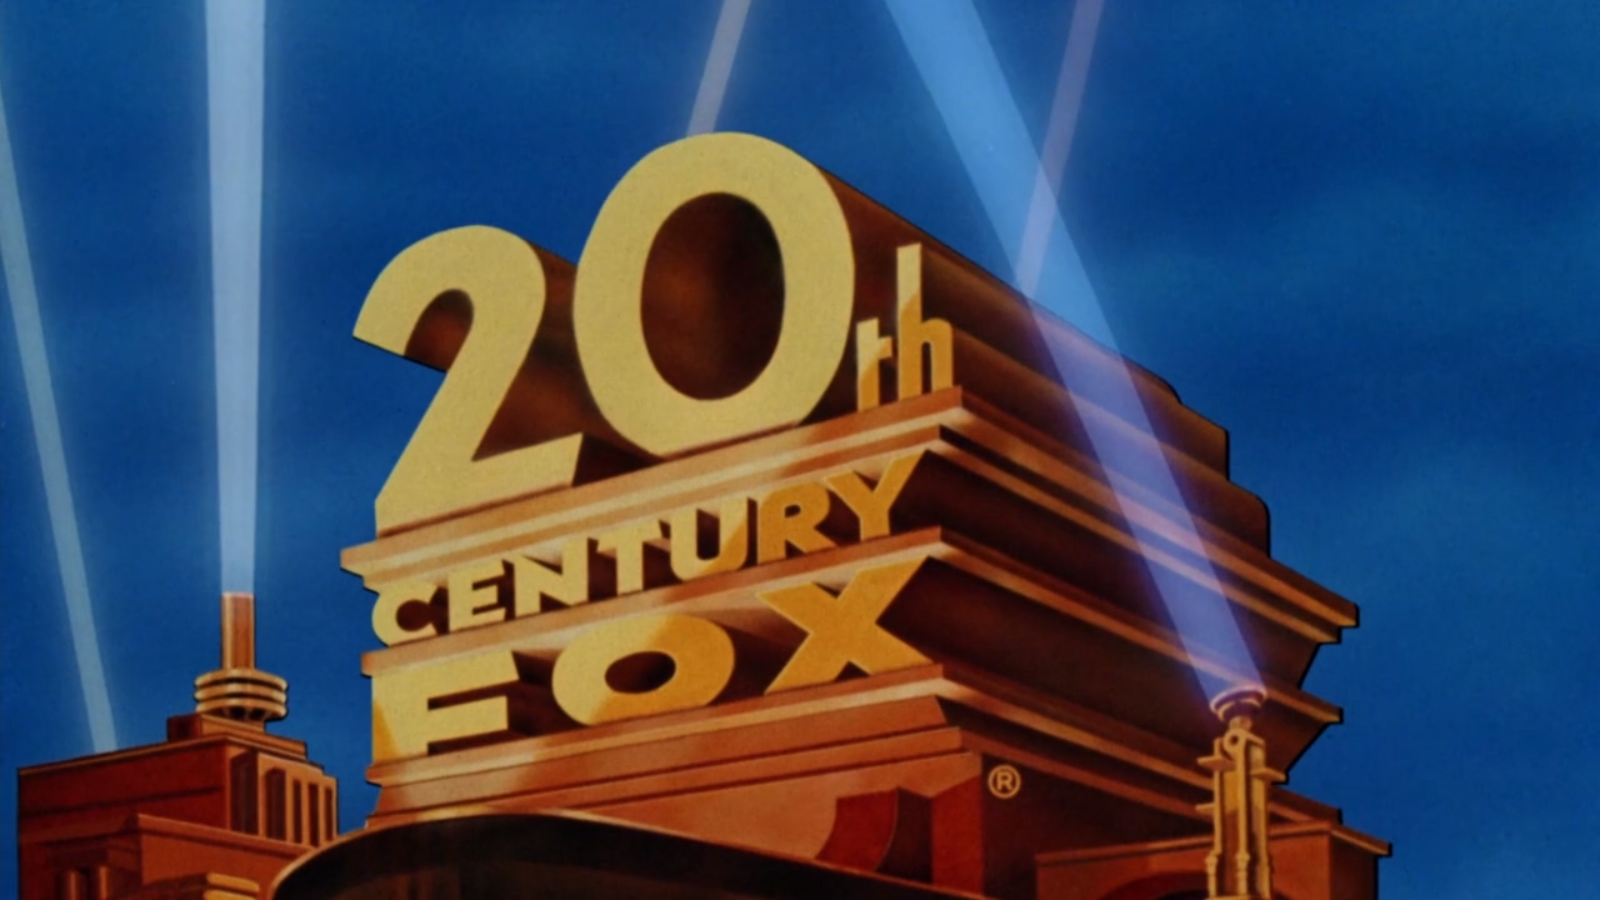 20th Century Fox logo and symbol, meaning, history, PNG